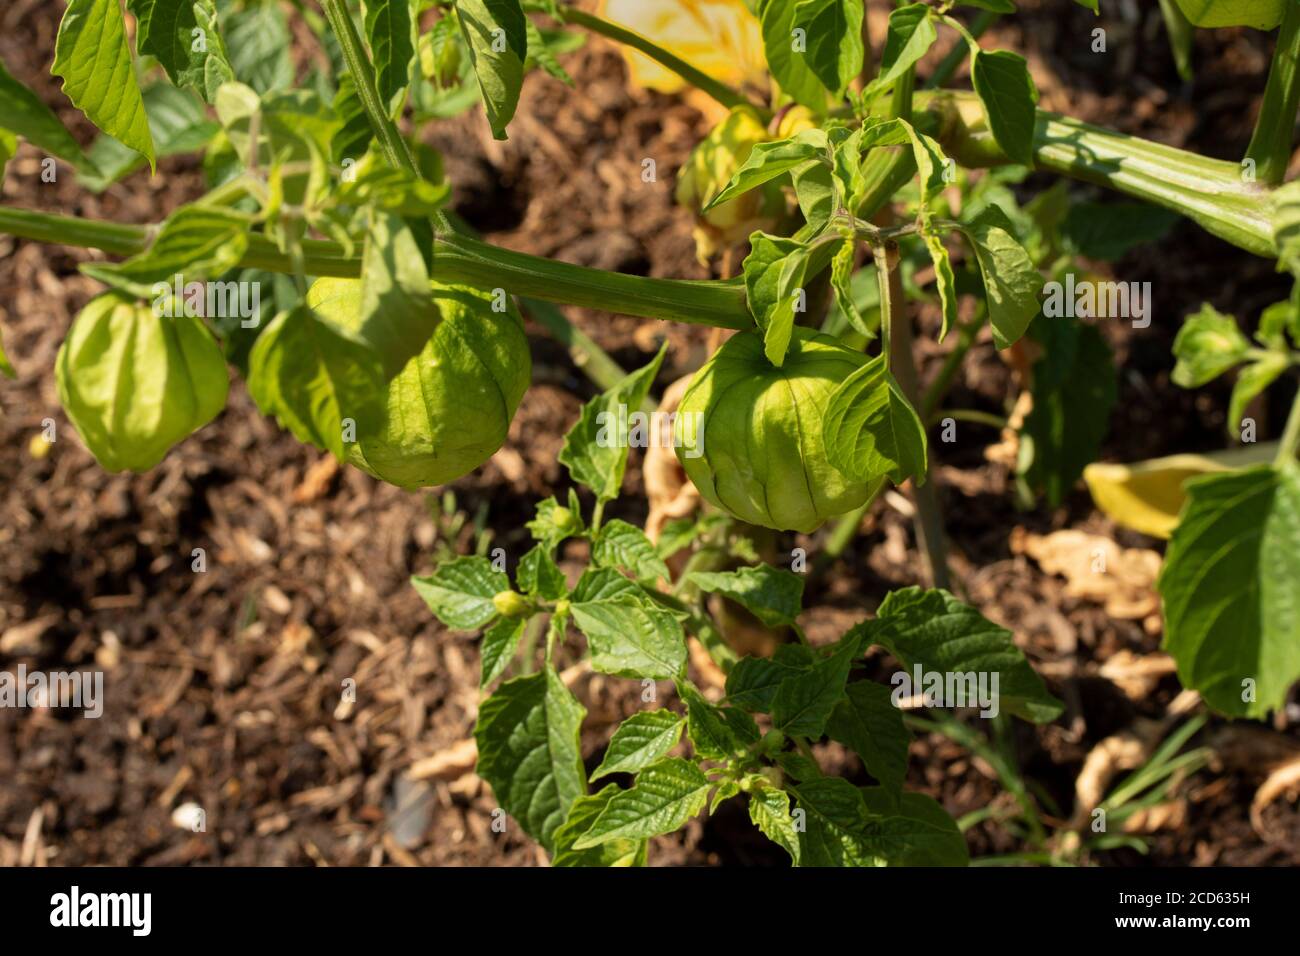 Tomatillo plant and fruit in a garden setting, food ingredient Stock Photo